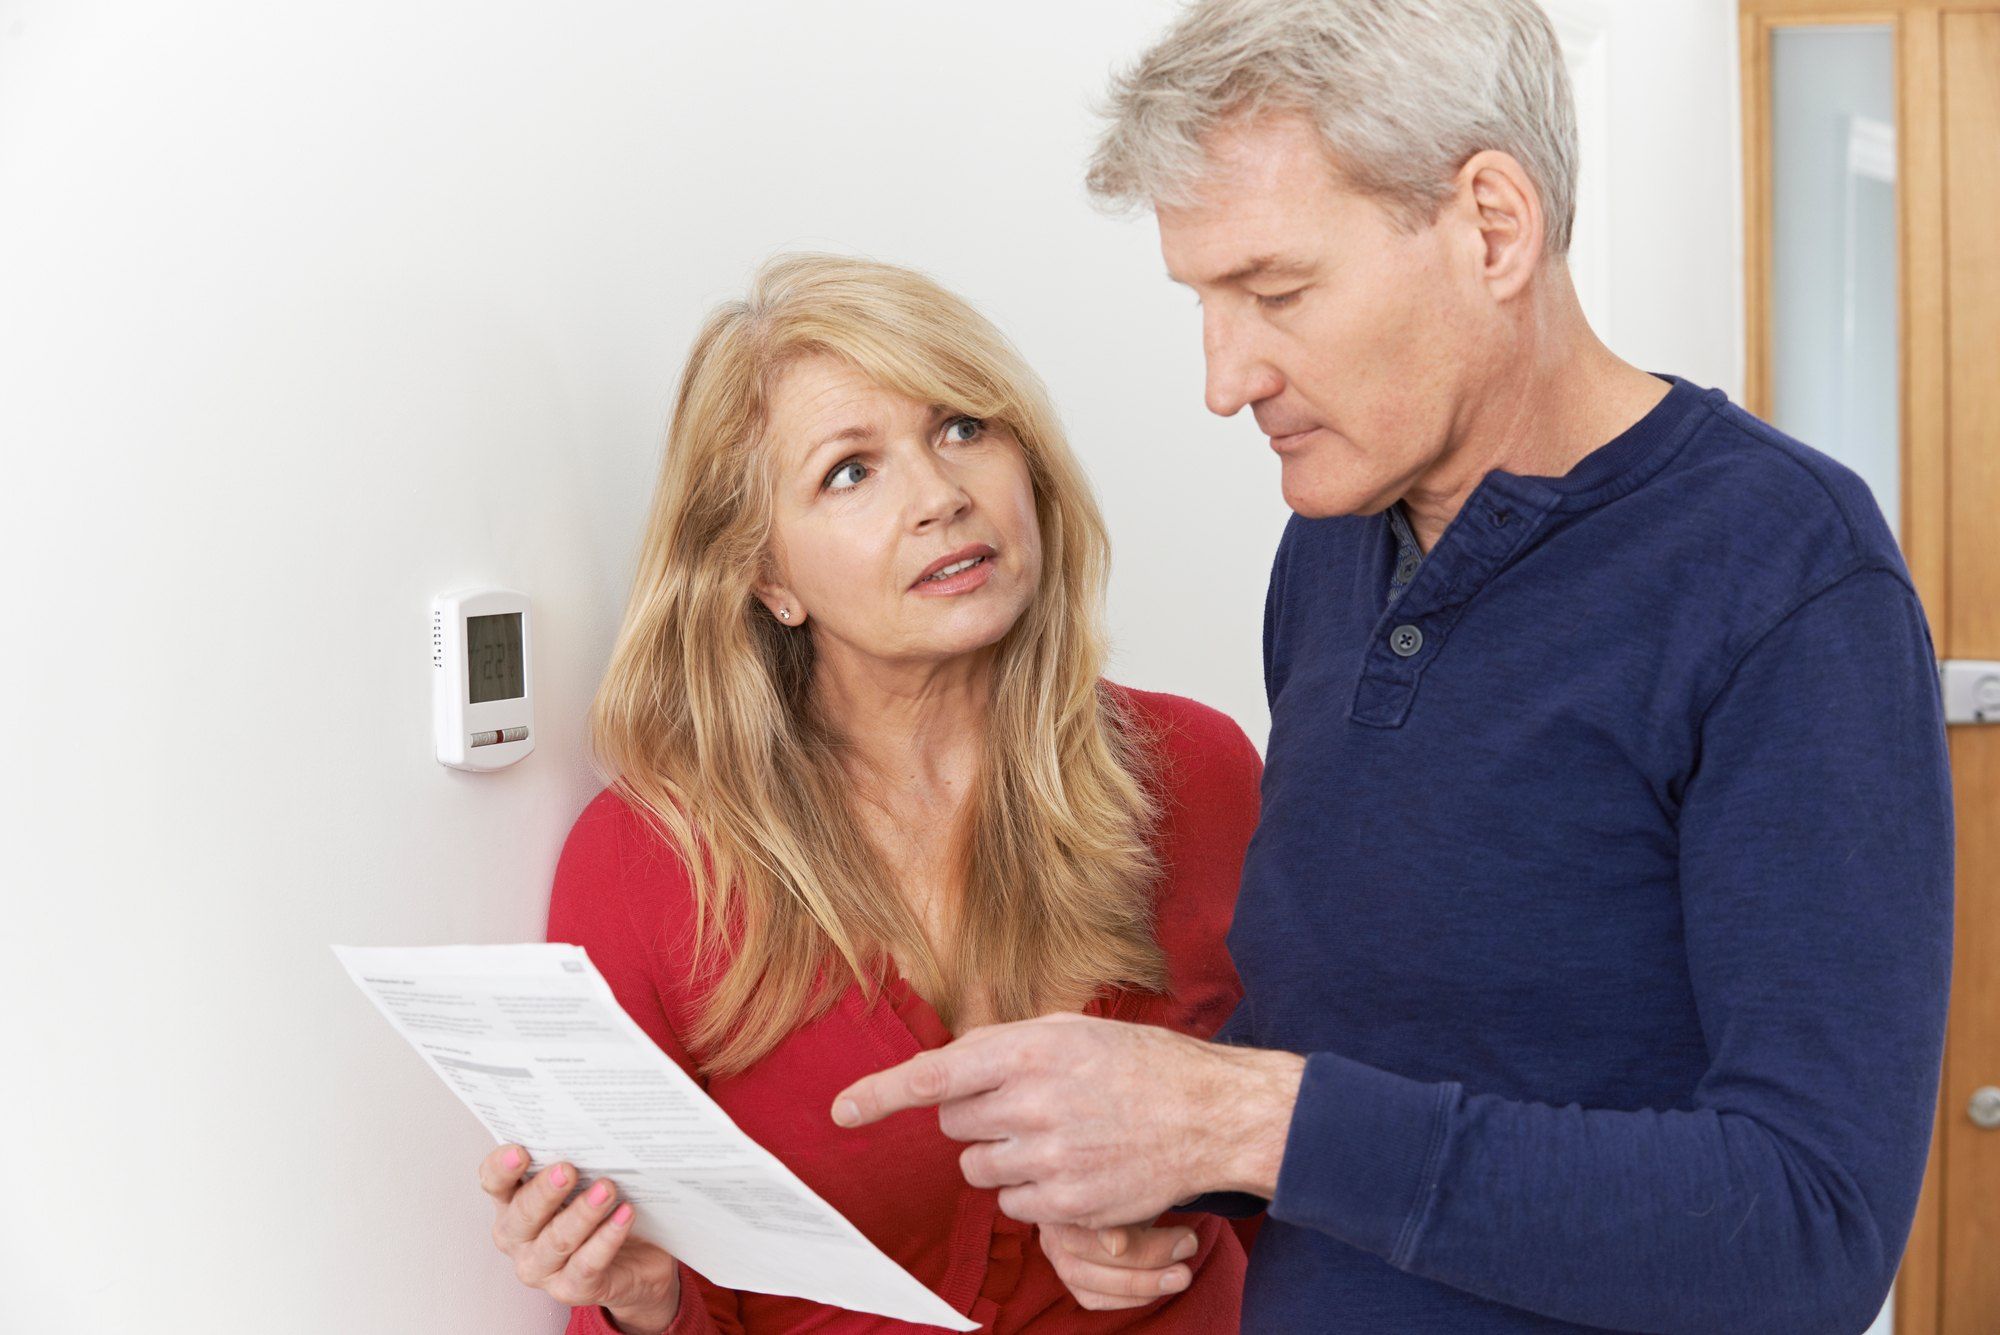 Couple worried about bill regarding energy suppliers not refunding customers 